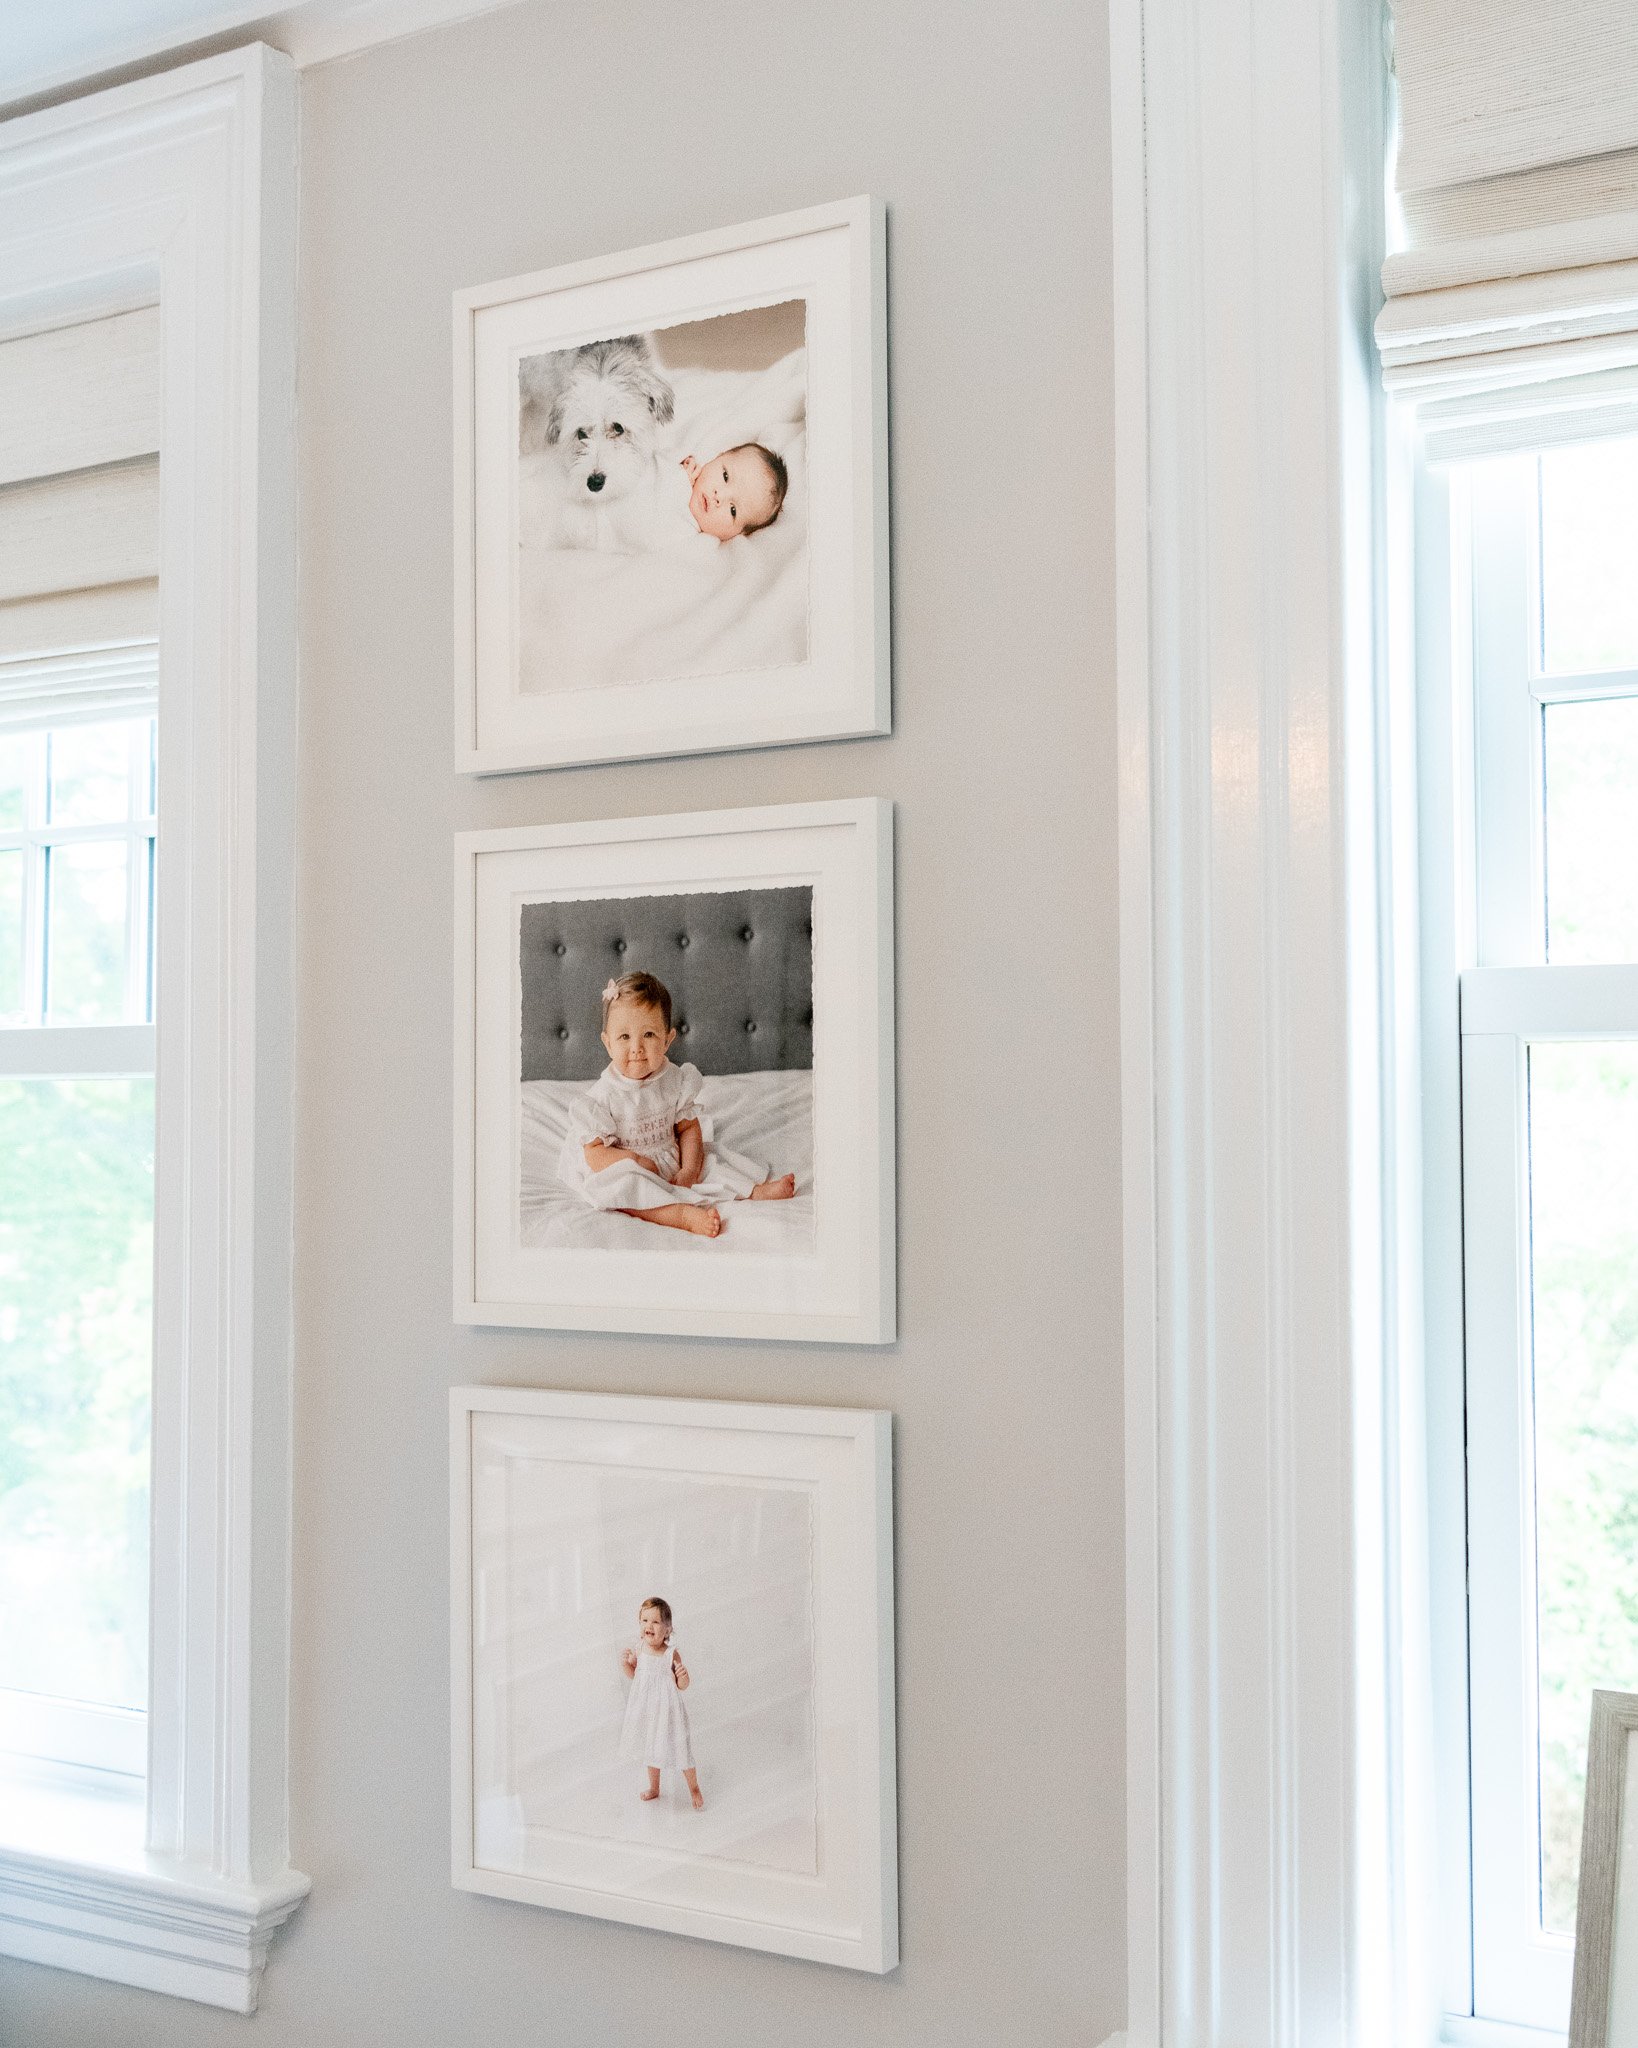   Nursery with three framed baby portraits hung vertically with white frames and mats. Gallery wall with three vertical prints in matching frames #EssexCountyFamilyPhotographer #MorrisCountyFamilyPhotographer #NorthernNewJerseyFamilyPhotographer #Nor